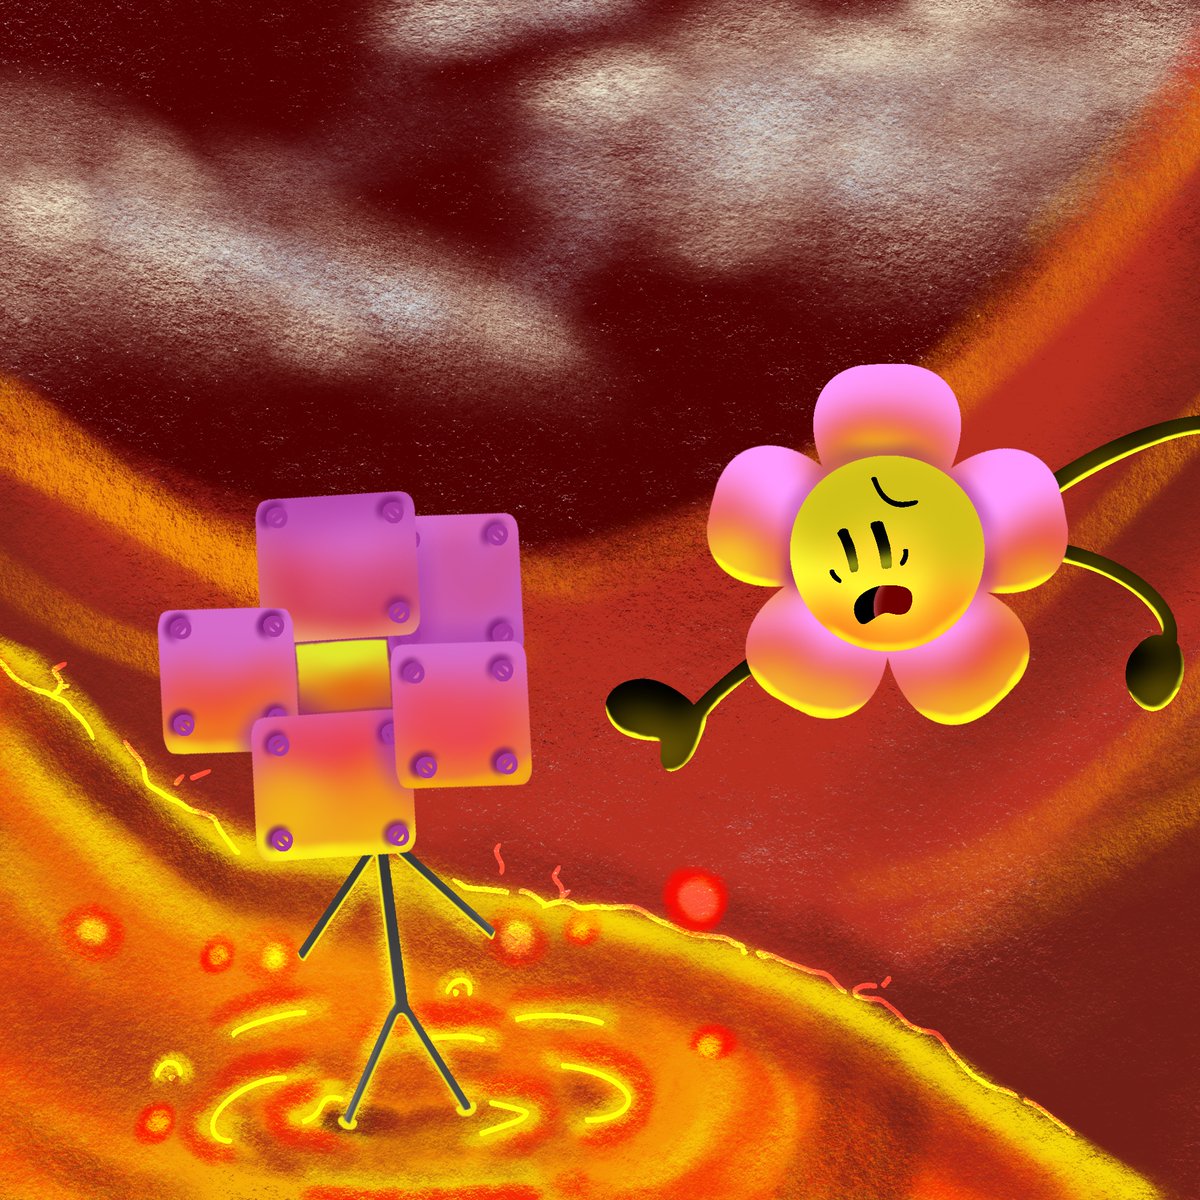 #bfdi #tpot #BFB 
There is only one flower